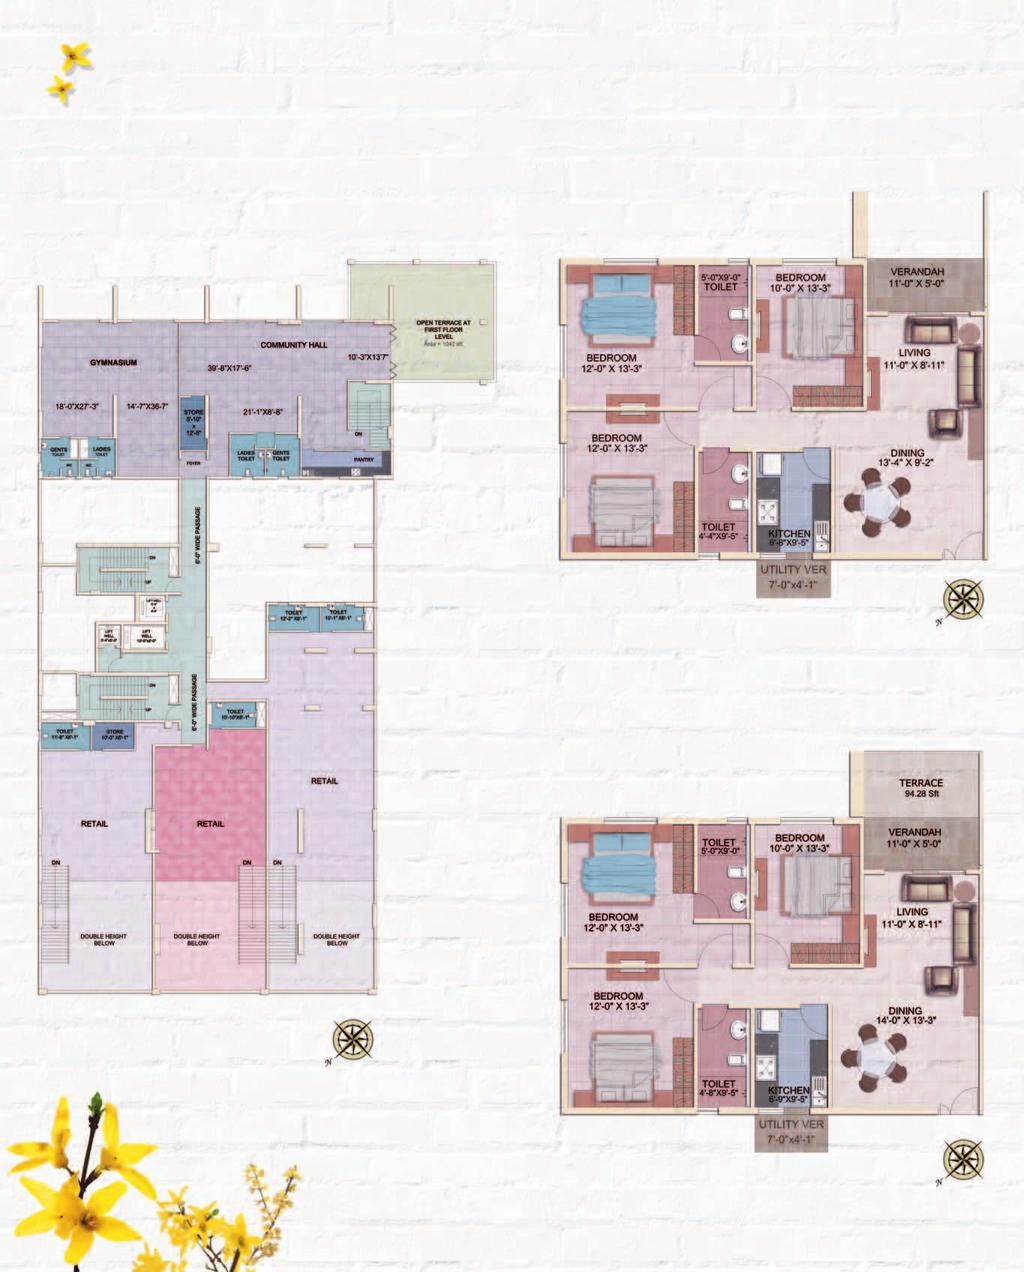 1st Floor Plan Flat A Floor Plan without Terrace Flat A at 3rd, 4th, 5th, 6th, 8th, 9th, 11th, 12th,14th,15th,17th &18th Floors Super Built-up Area = 1,623 sq. ft.